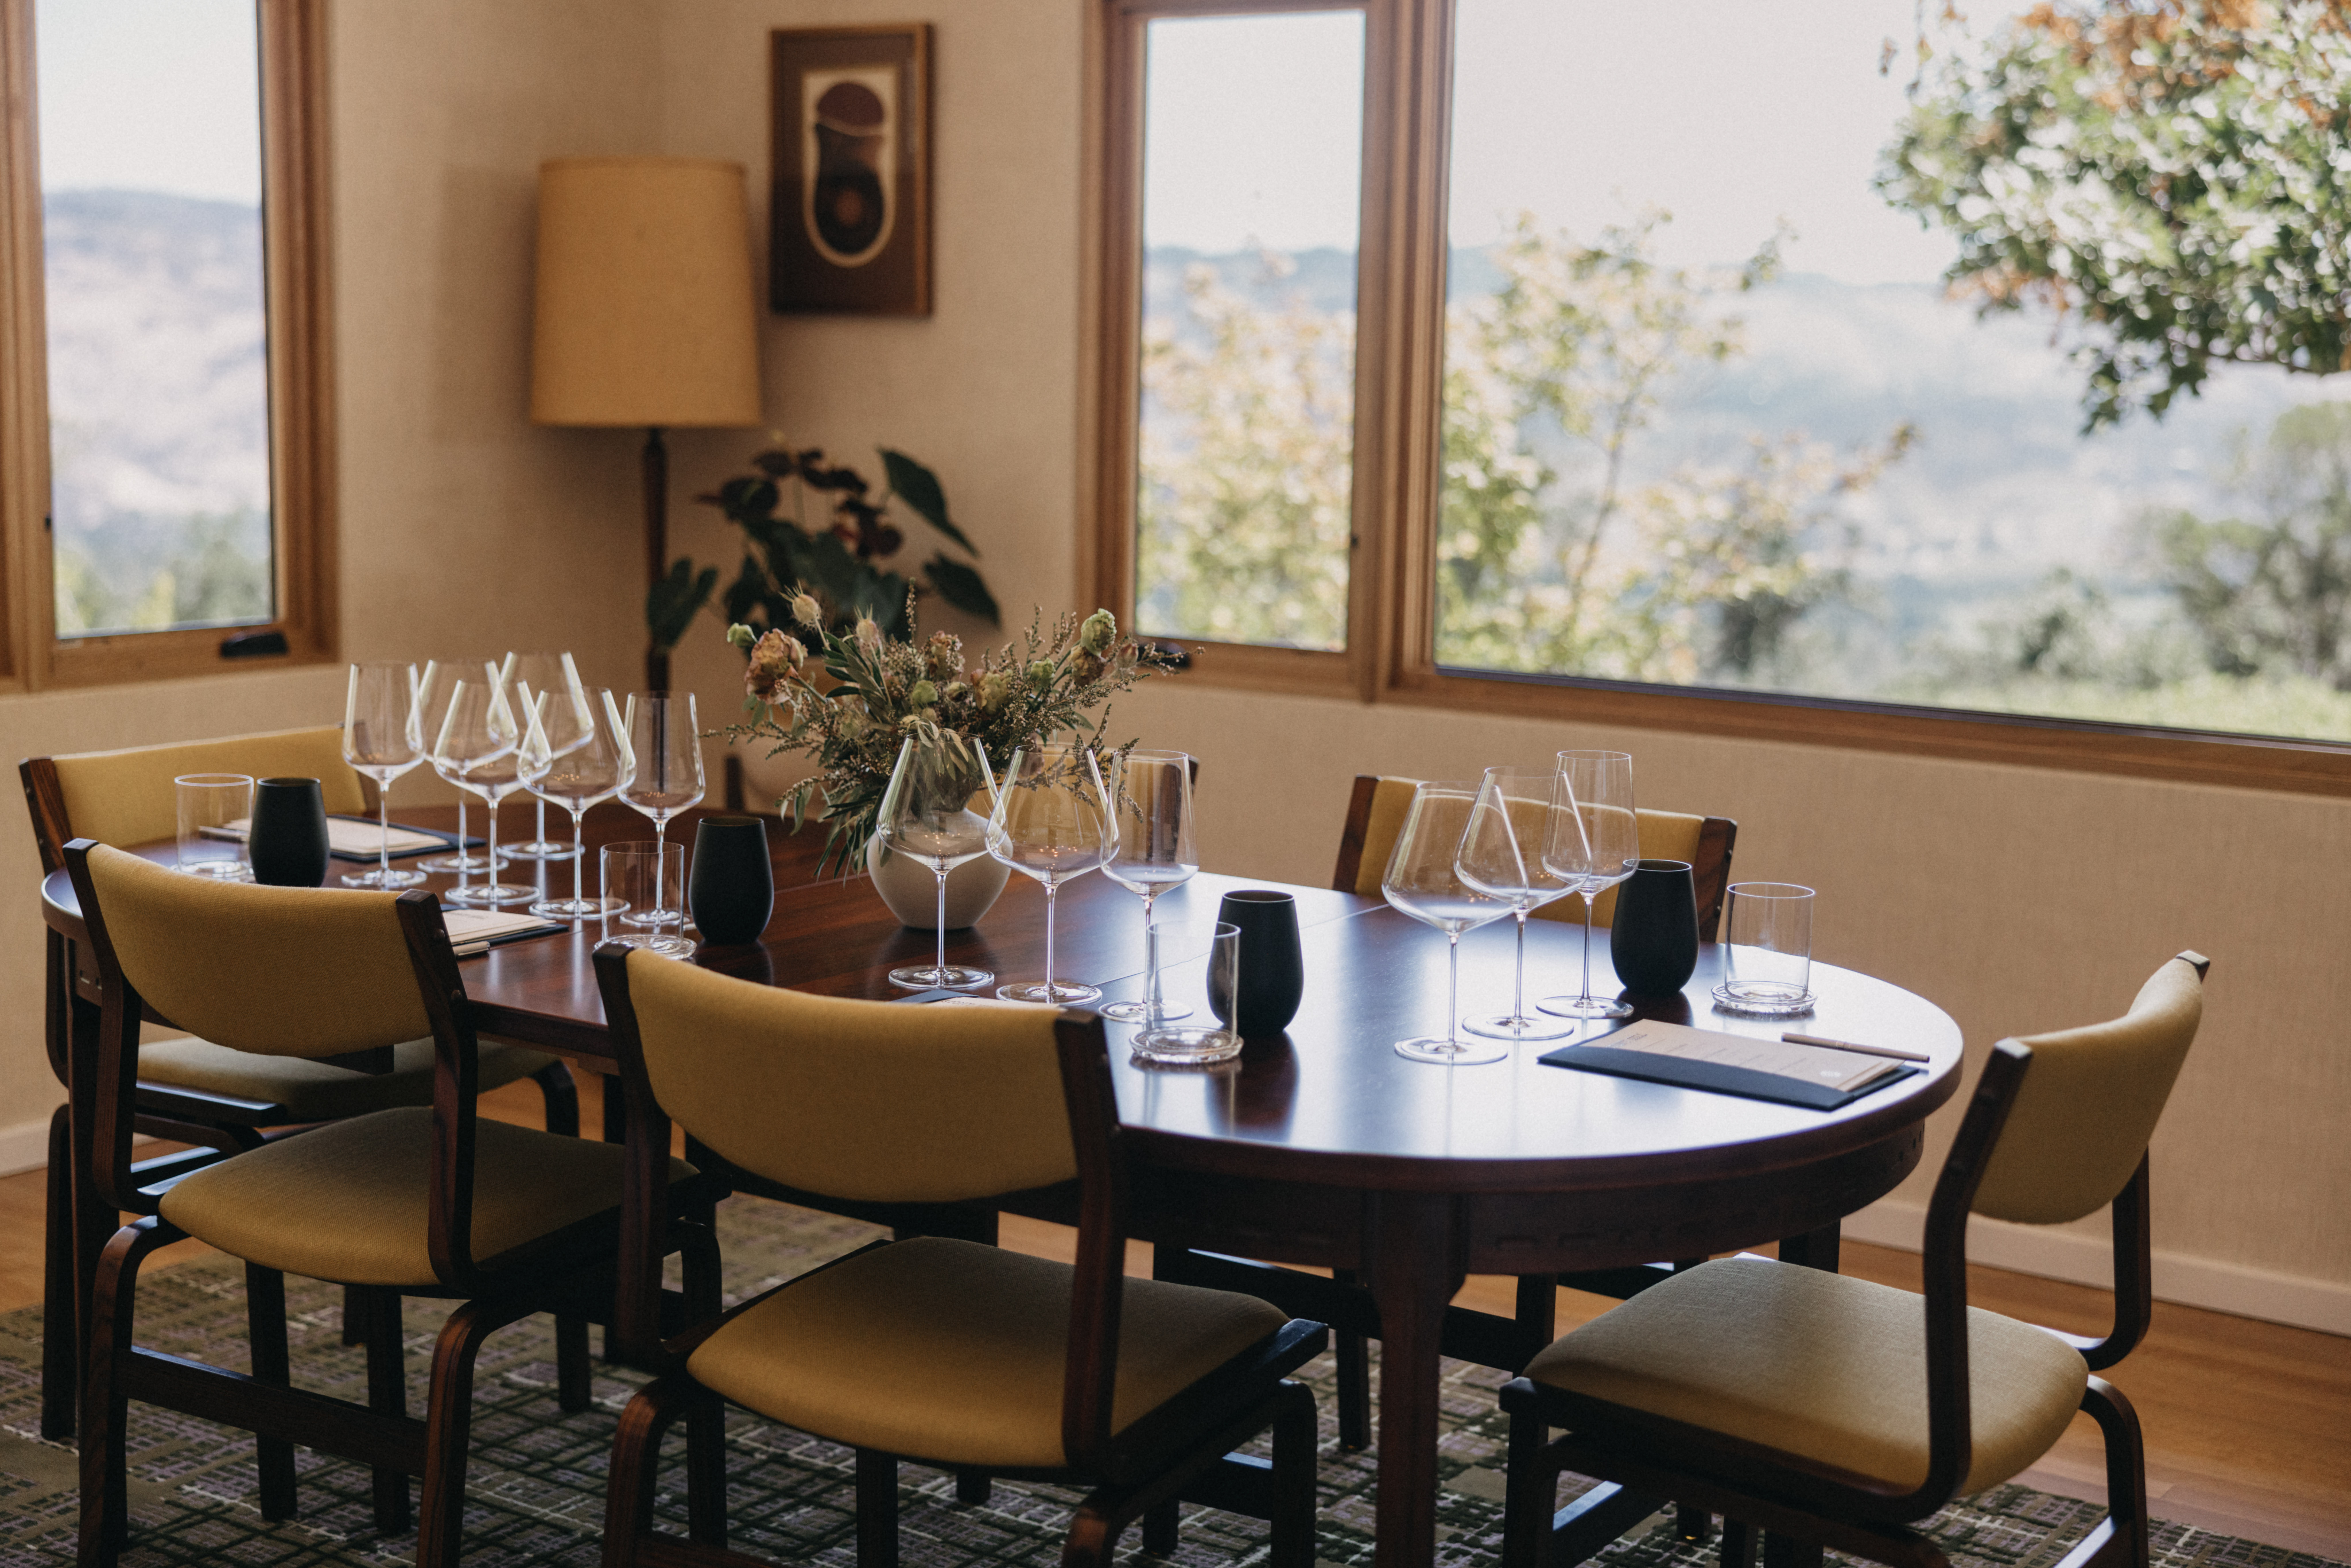 A table inside a room at the Stony Hill residences, with a setting ready for a tasting including wine glasses.